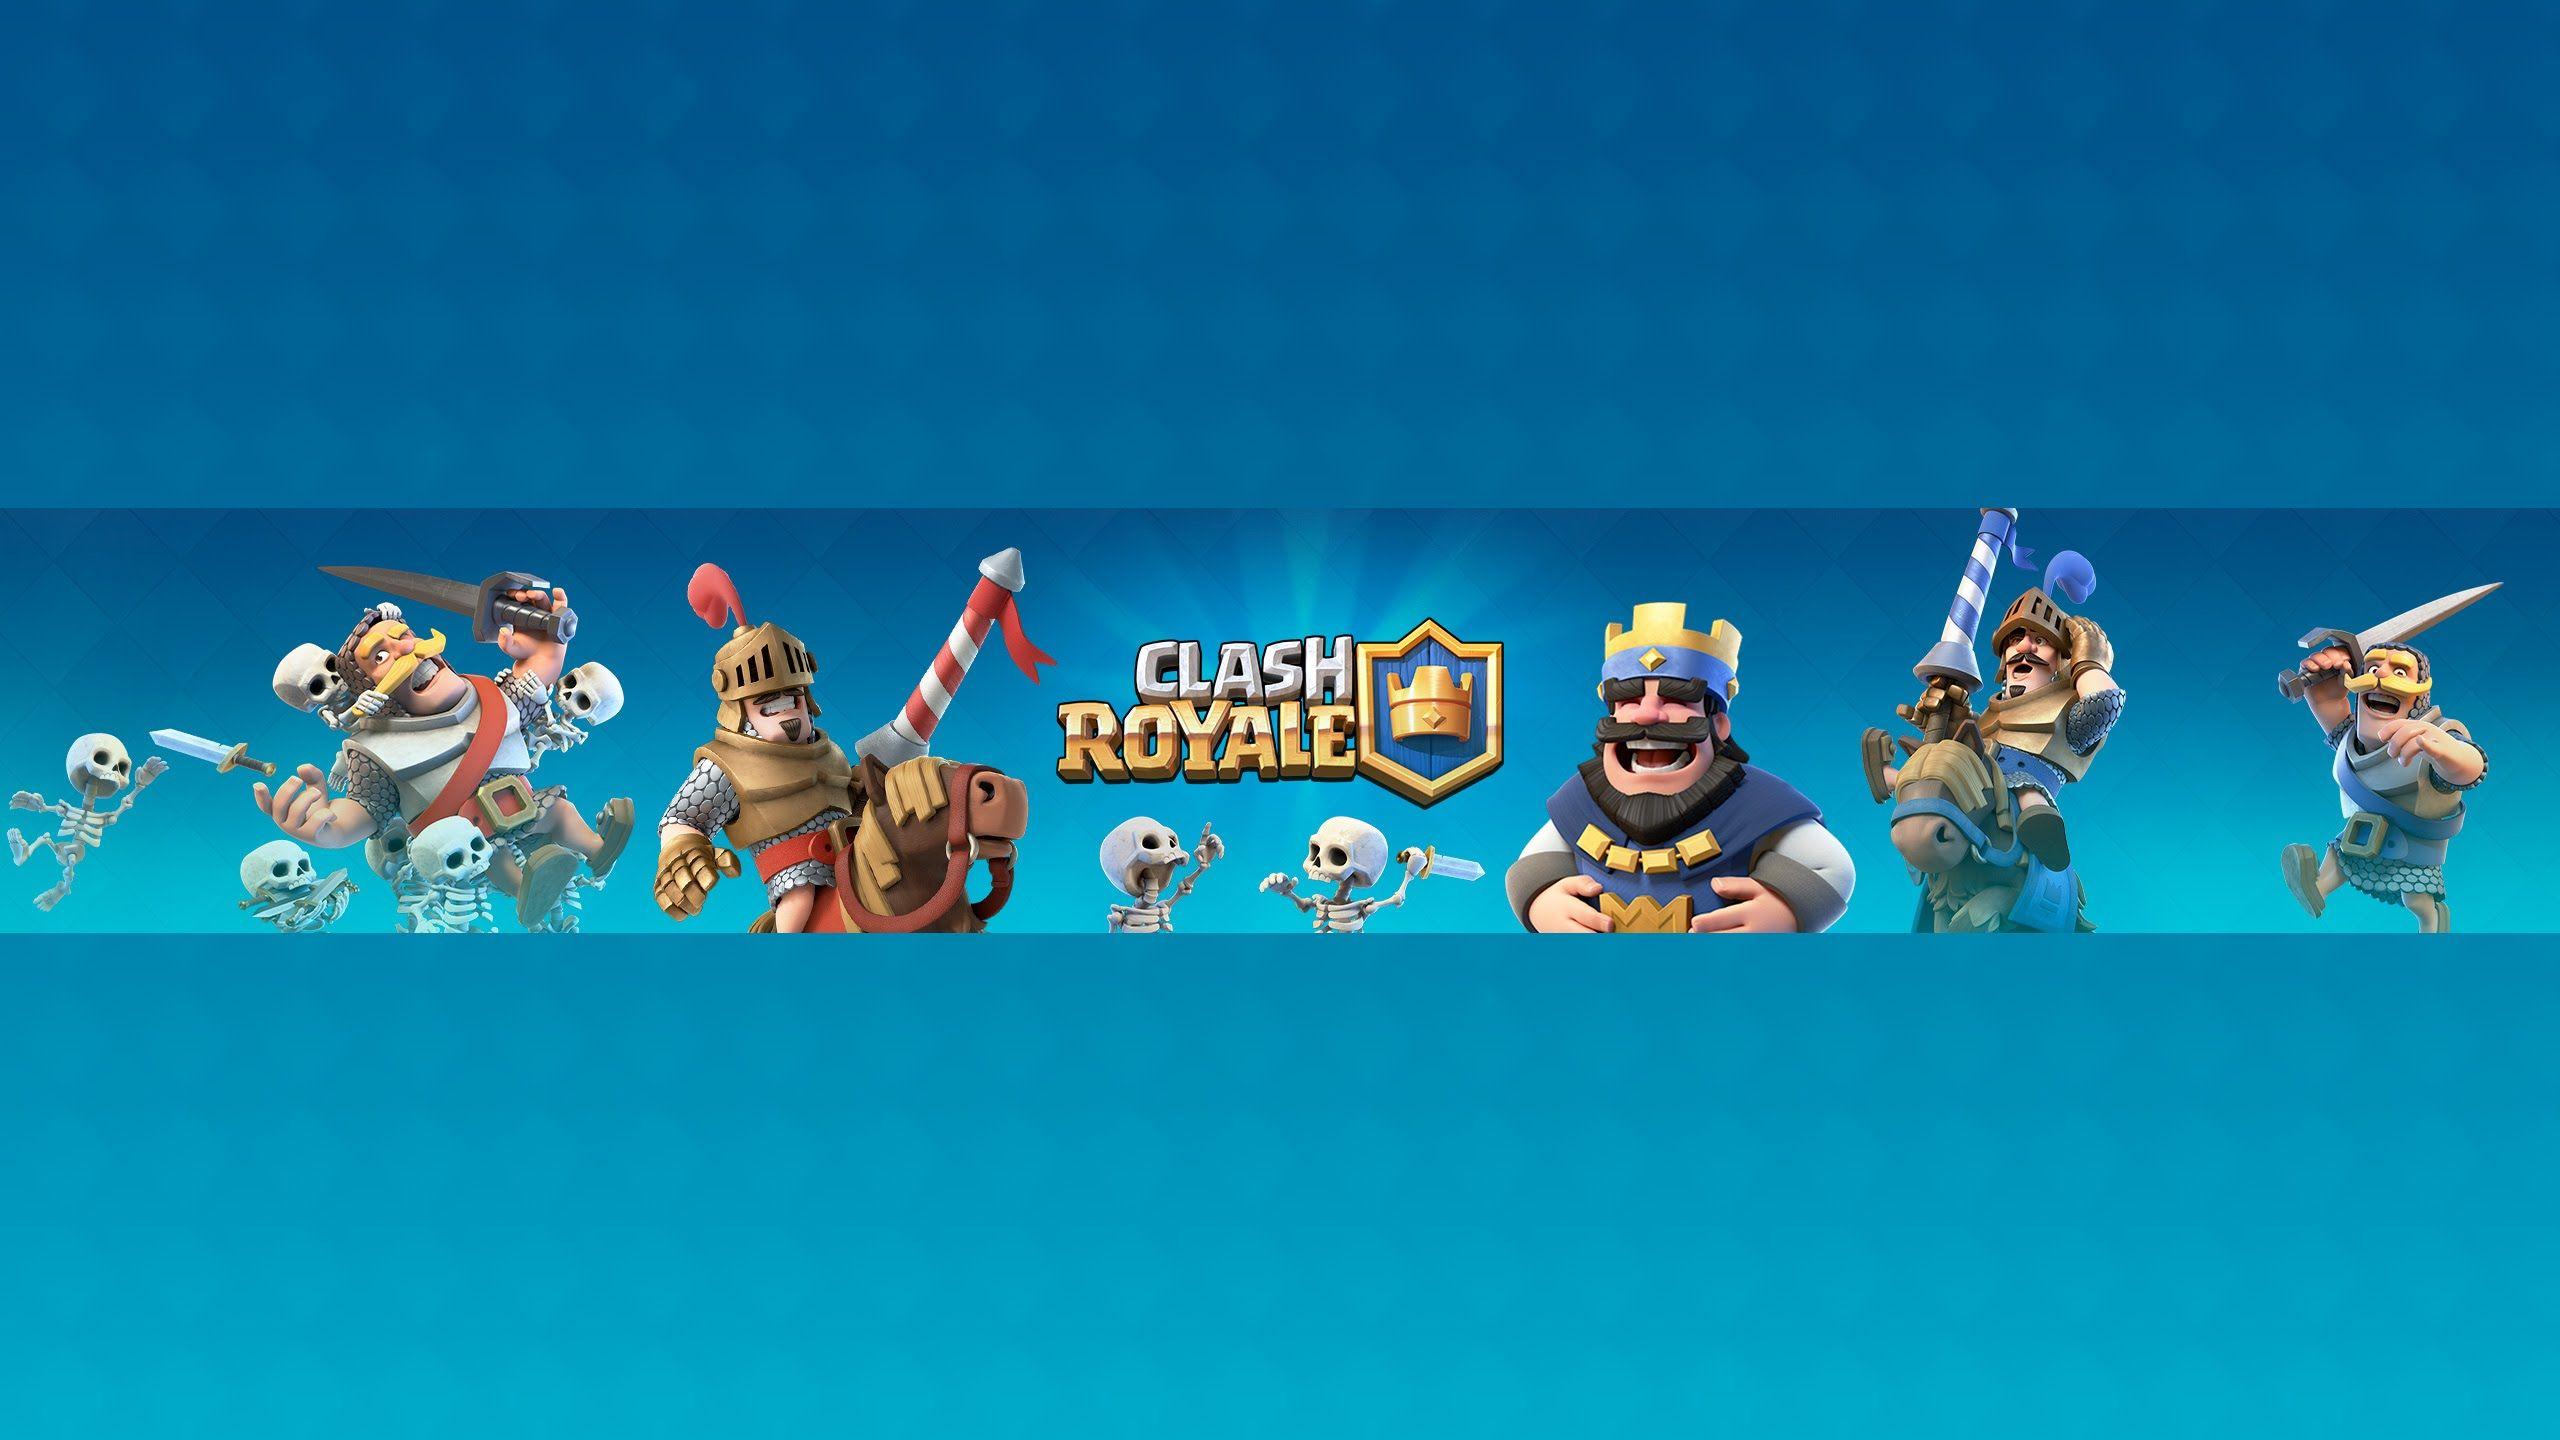 Clash Royale Wallpapers UHD